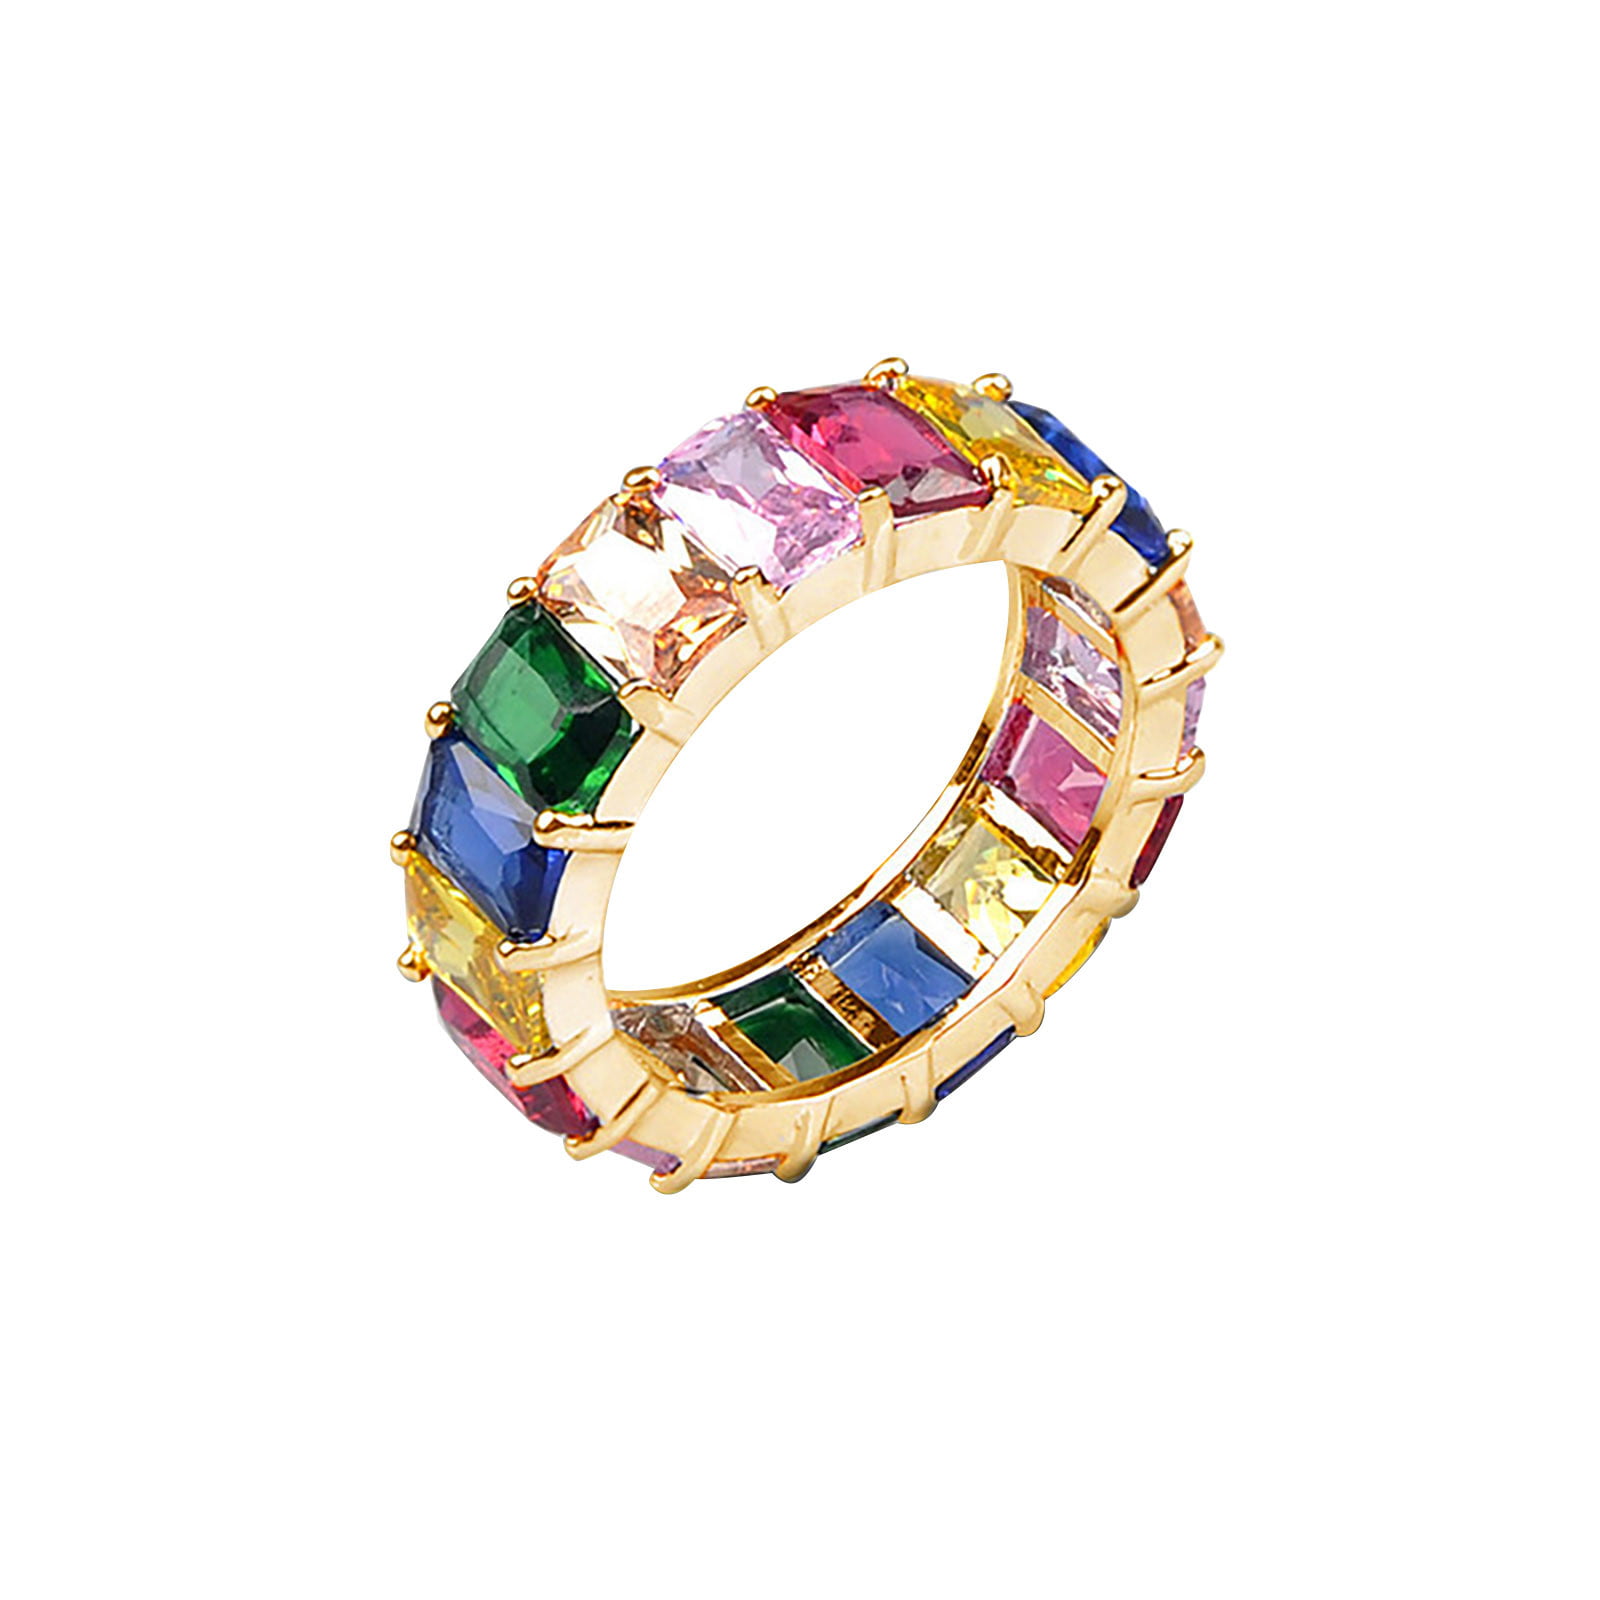 Multicolor Zircon Stone Rings For Women Wholesale Fashion Gemstone Jewelry  Accessories With Display Box Perfect For Parties And Gifting From  Zecen2020, $22.63